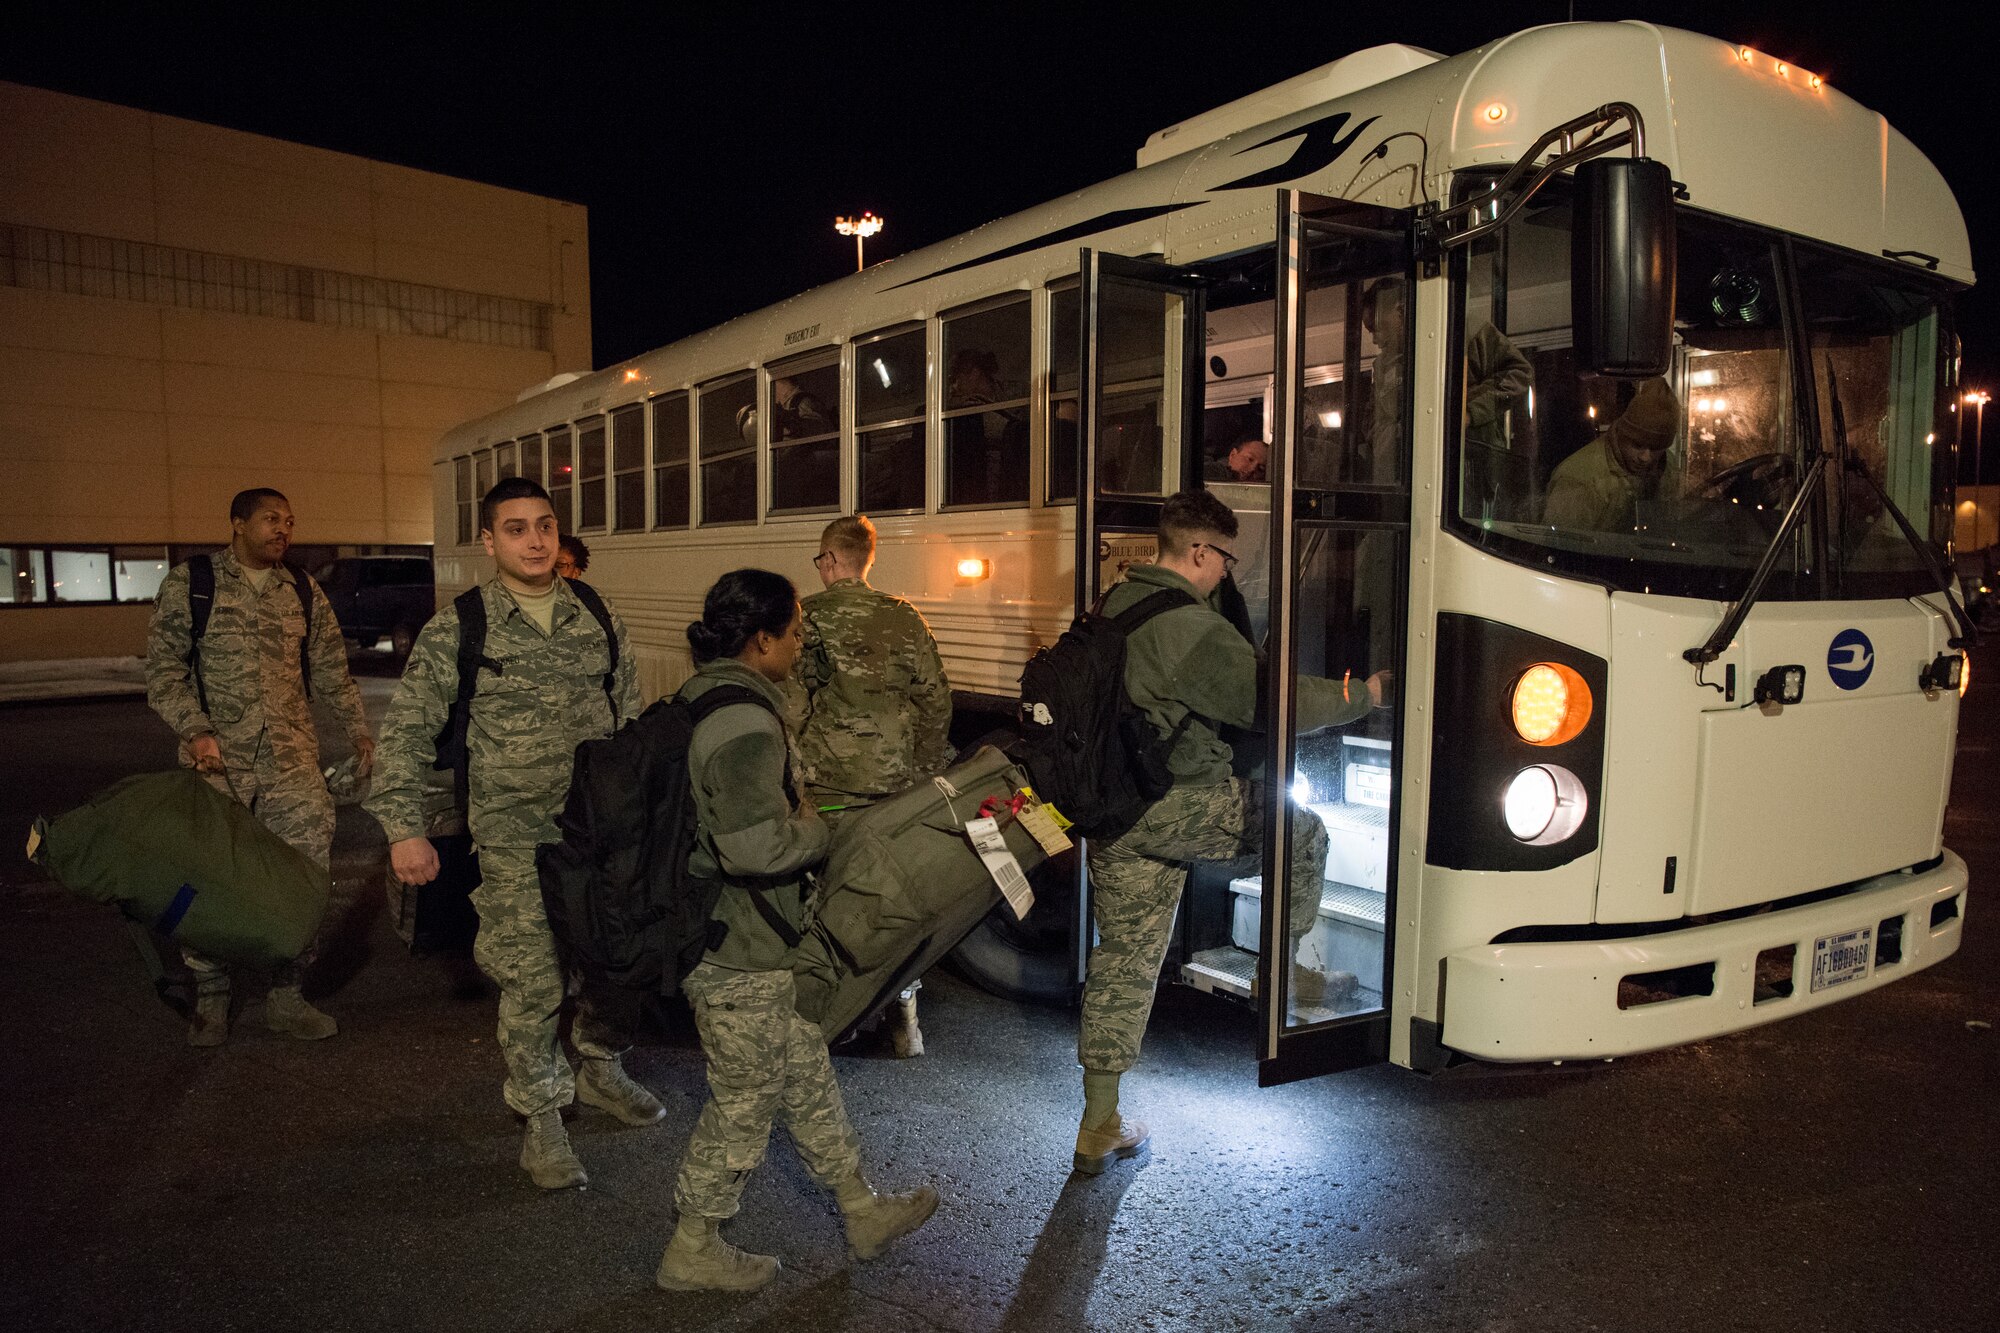 Airmen board a shuttle during a simulated deployment for Polar Force 19-4 at Joint Base Elmendorf-Richardson, Alaska, March 25, 2019. Polar Force is a two-week exercise designed to test JBER’s mission readiness. Exercises like this strengthen and develop the skills service members require when facing adverse situations.